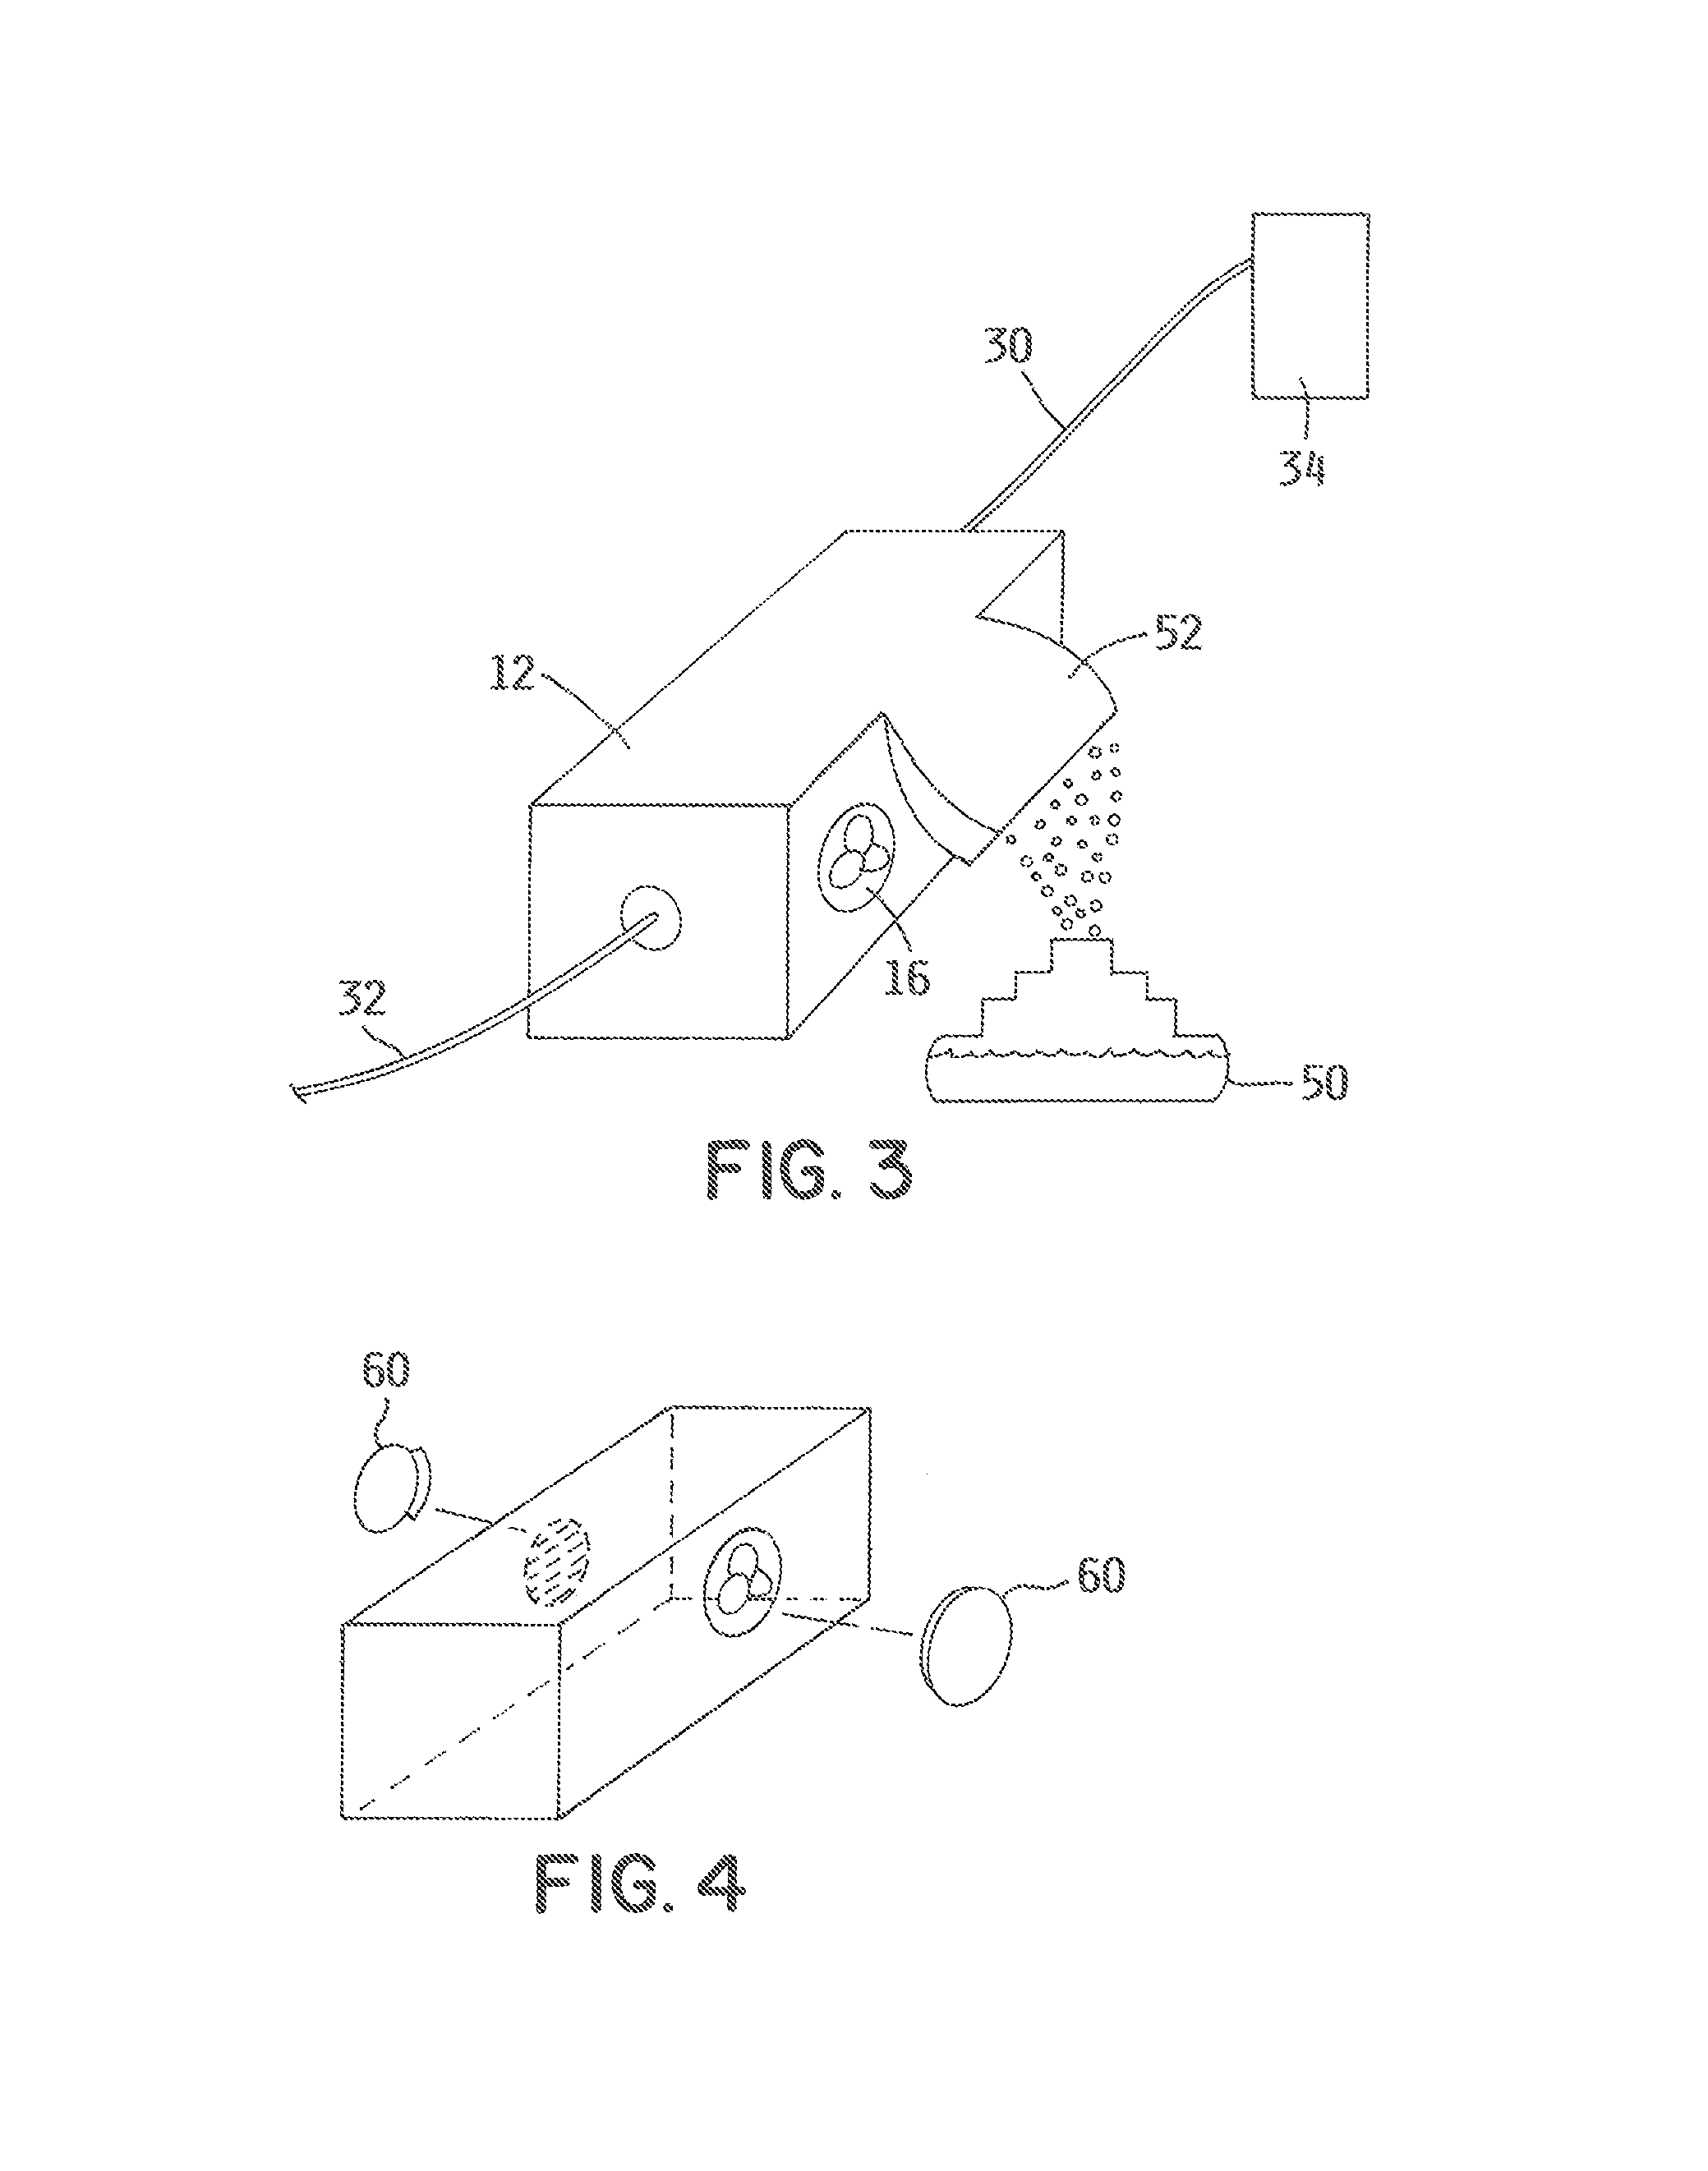 Method of providing breathable humidified oxygen gas to a patient